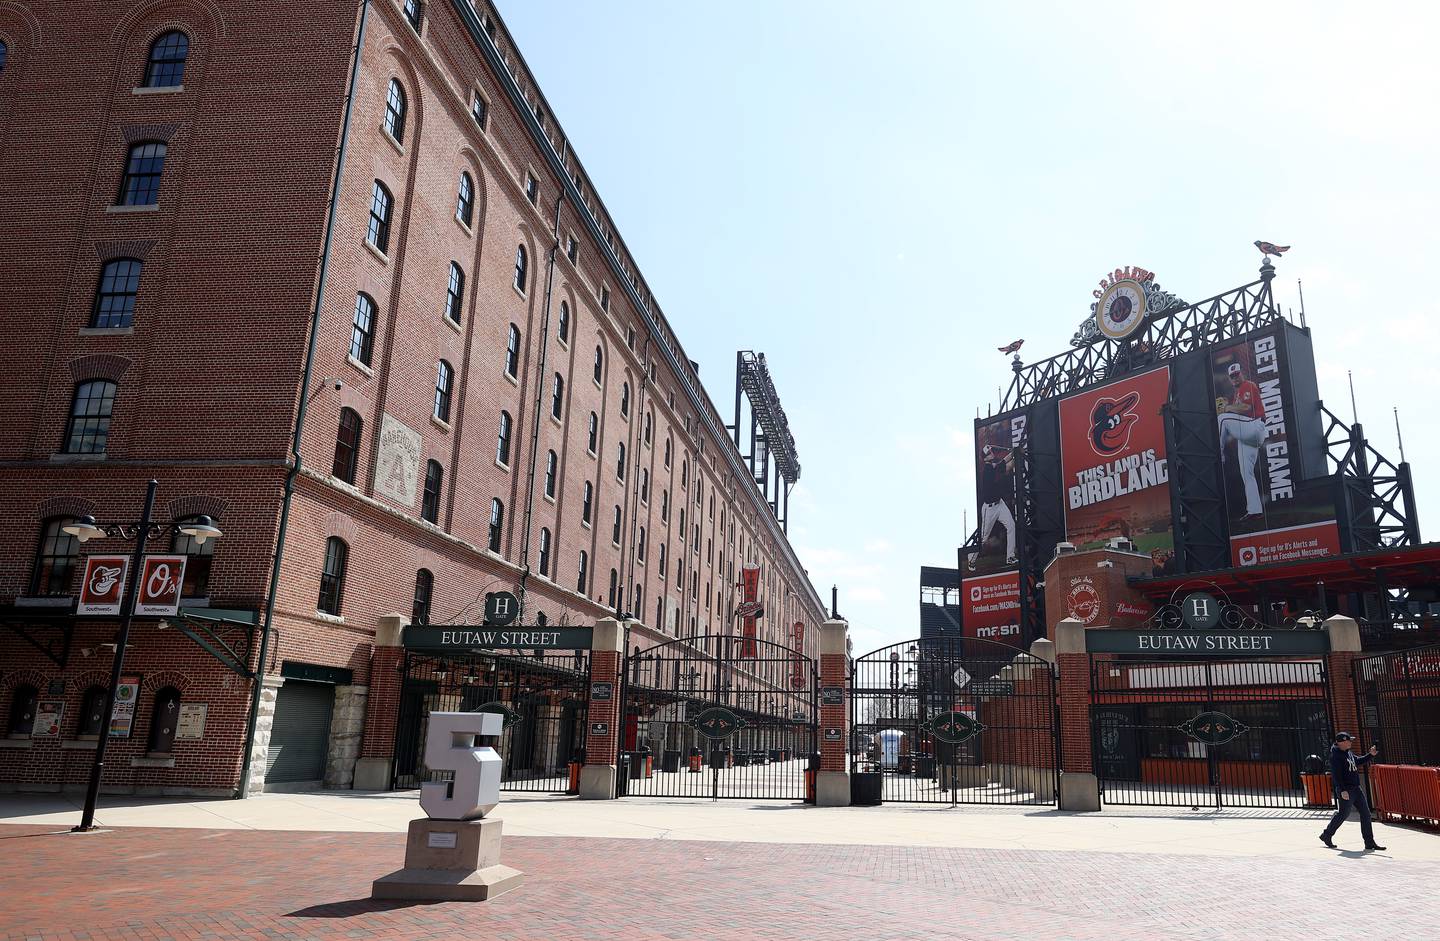 BALTIMORE, MARYLAND - MARCH 26: A general view of the Eutaw Street entrance of Oriole Park at Camden Yards on March 26, 2020 in Baltimore, Maryland. The Baltimore Orioles and New York Yankees Opening Day game scheduled for today, along with the entire MLB season, has been postponed due to the COVID-19 pandemic.